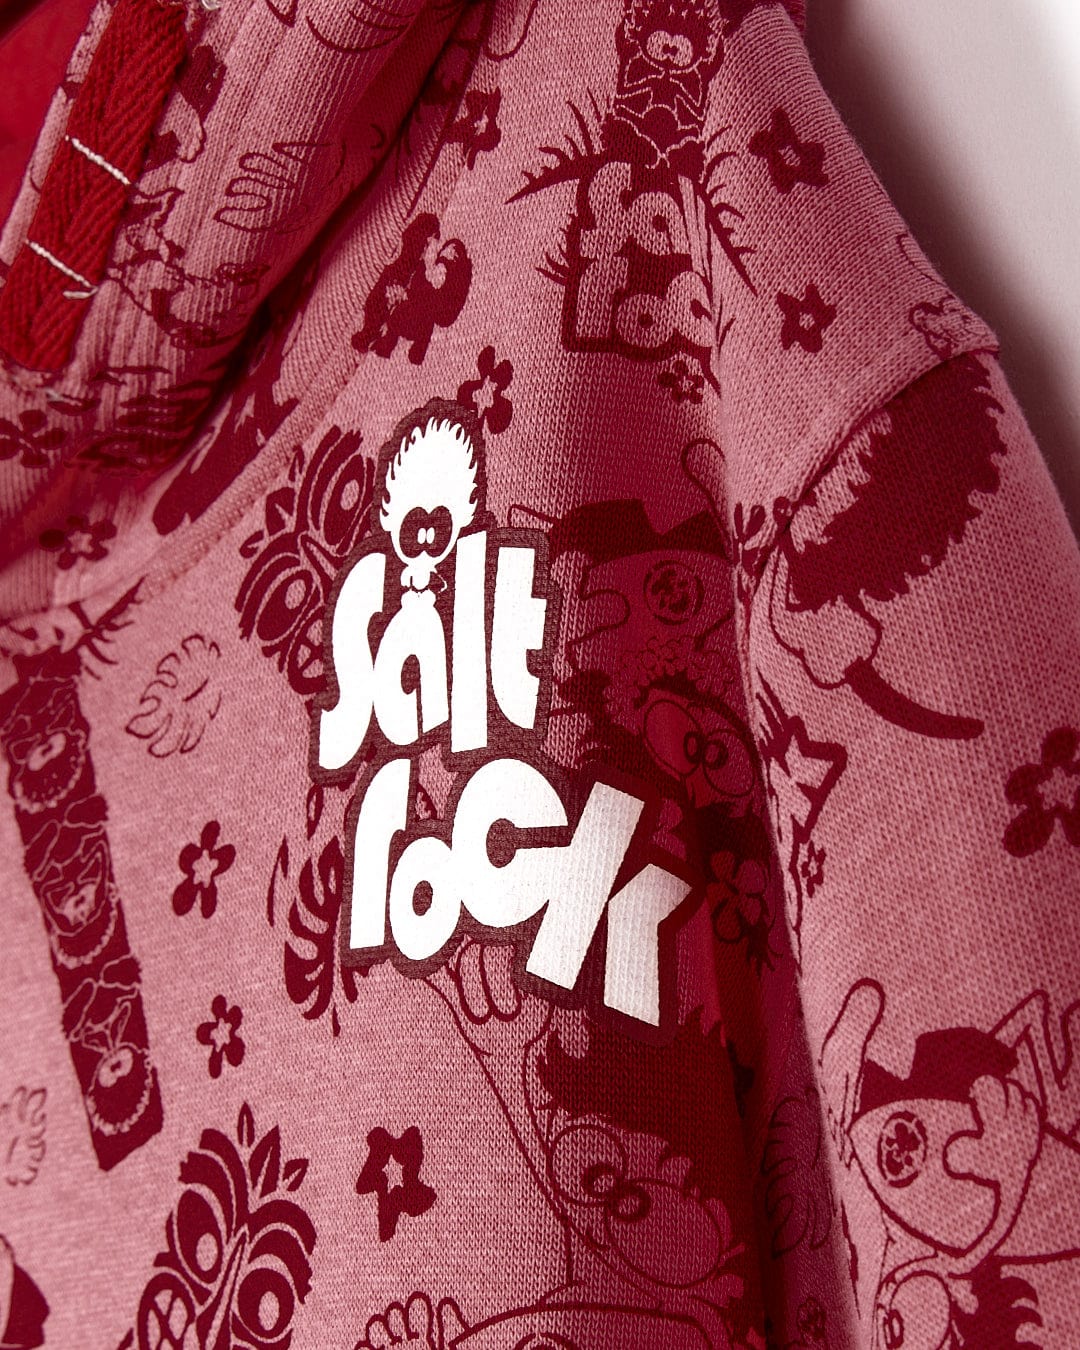 A Tiki Tok - Kids Pop Hoodie - Red with the word Saltrock on it.